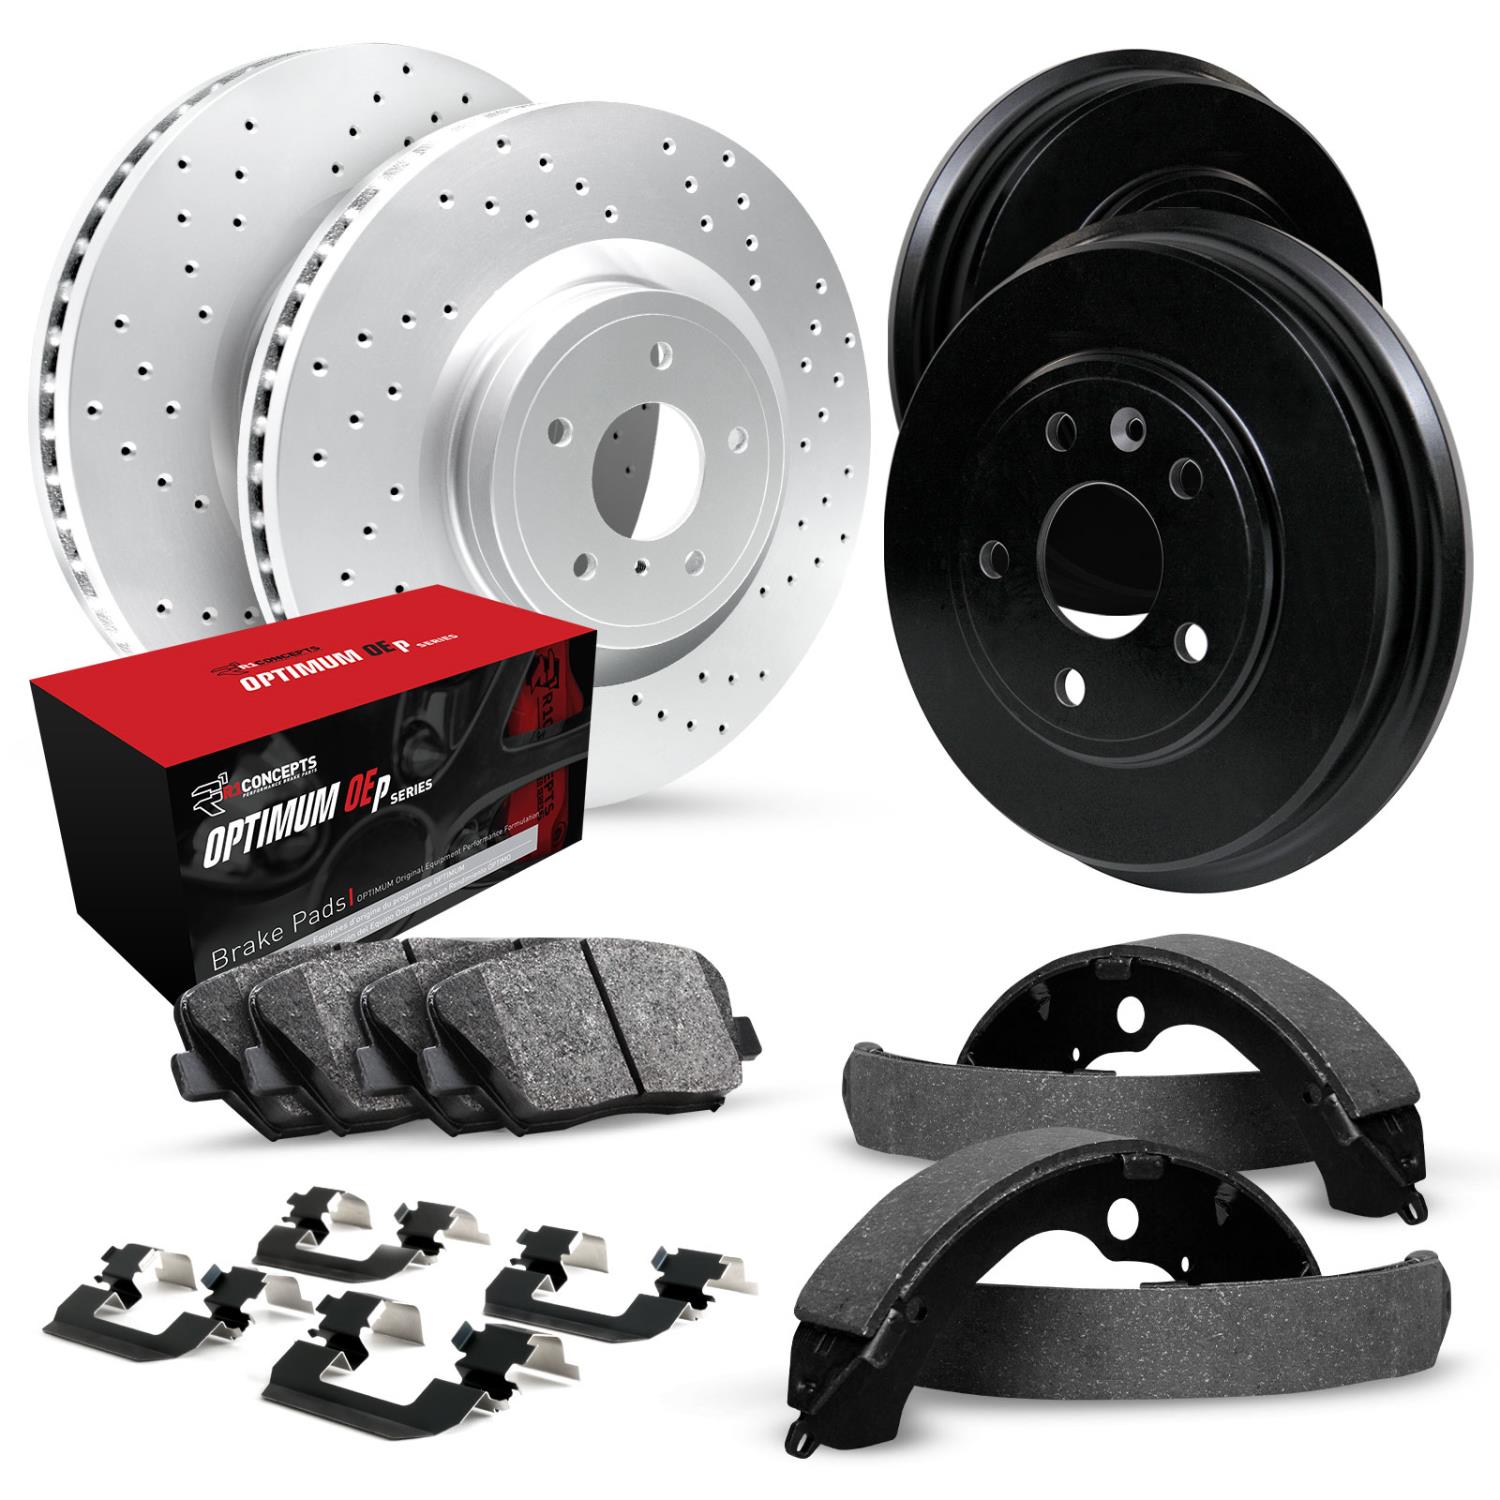 GEO-Carbon Drilled Brake Rotor & Drum Set w/Optimum OE Pads, Shoes, & Hardware, 1992-1995 GM, Position: Front & Rear